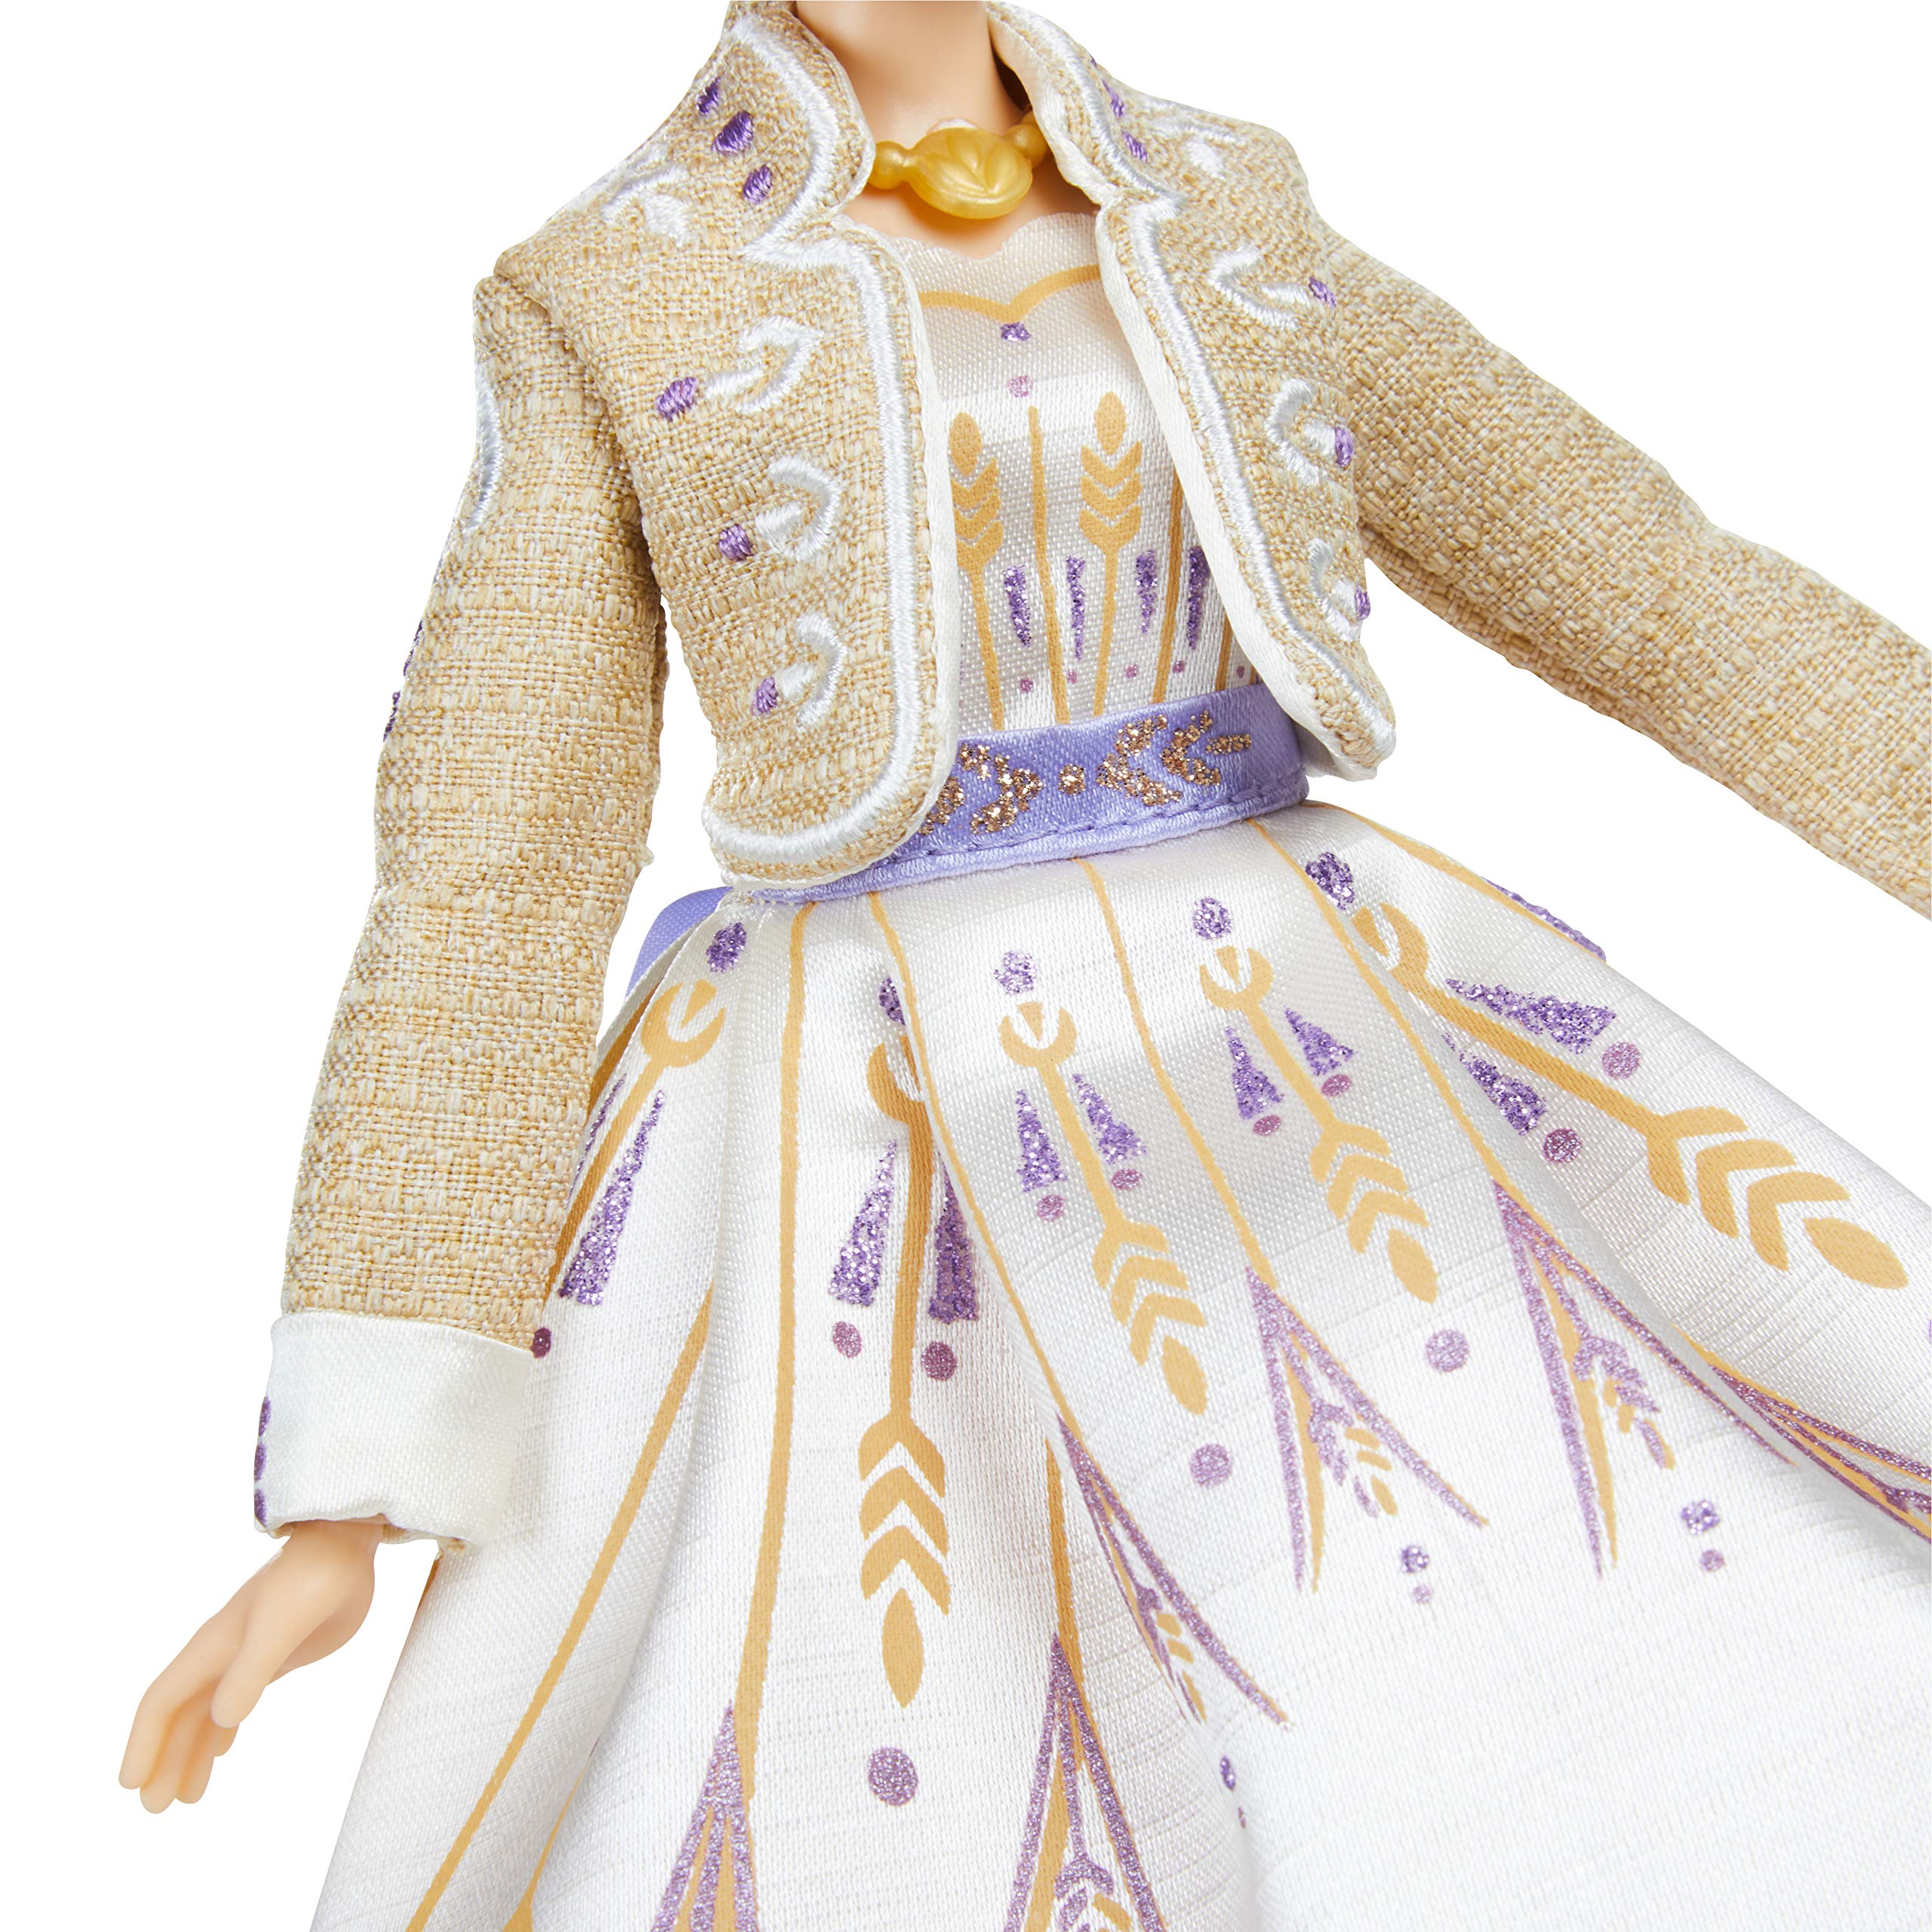 Disney Frozen Elsa, Anna and Olaf Fashion Doll Set with Dresses and Shoes Inspired by Disney's Frozen 2 – Toy for Children Aged 3 and Up [Amazon Exclusive] - Amazon Exclusive